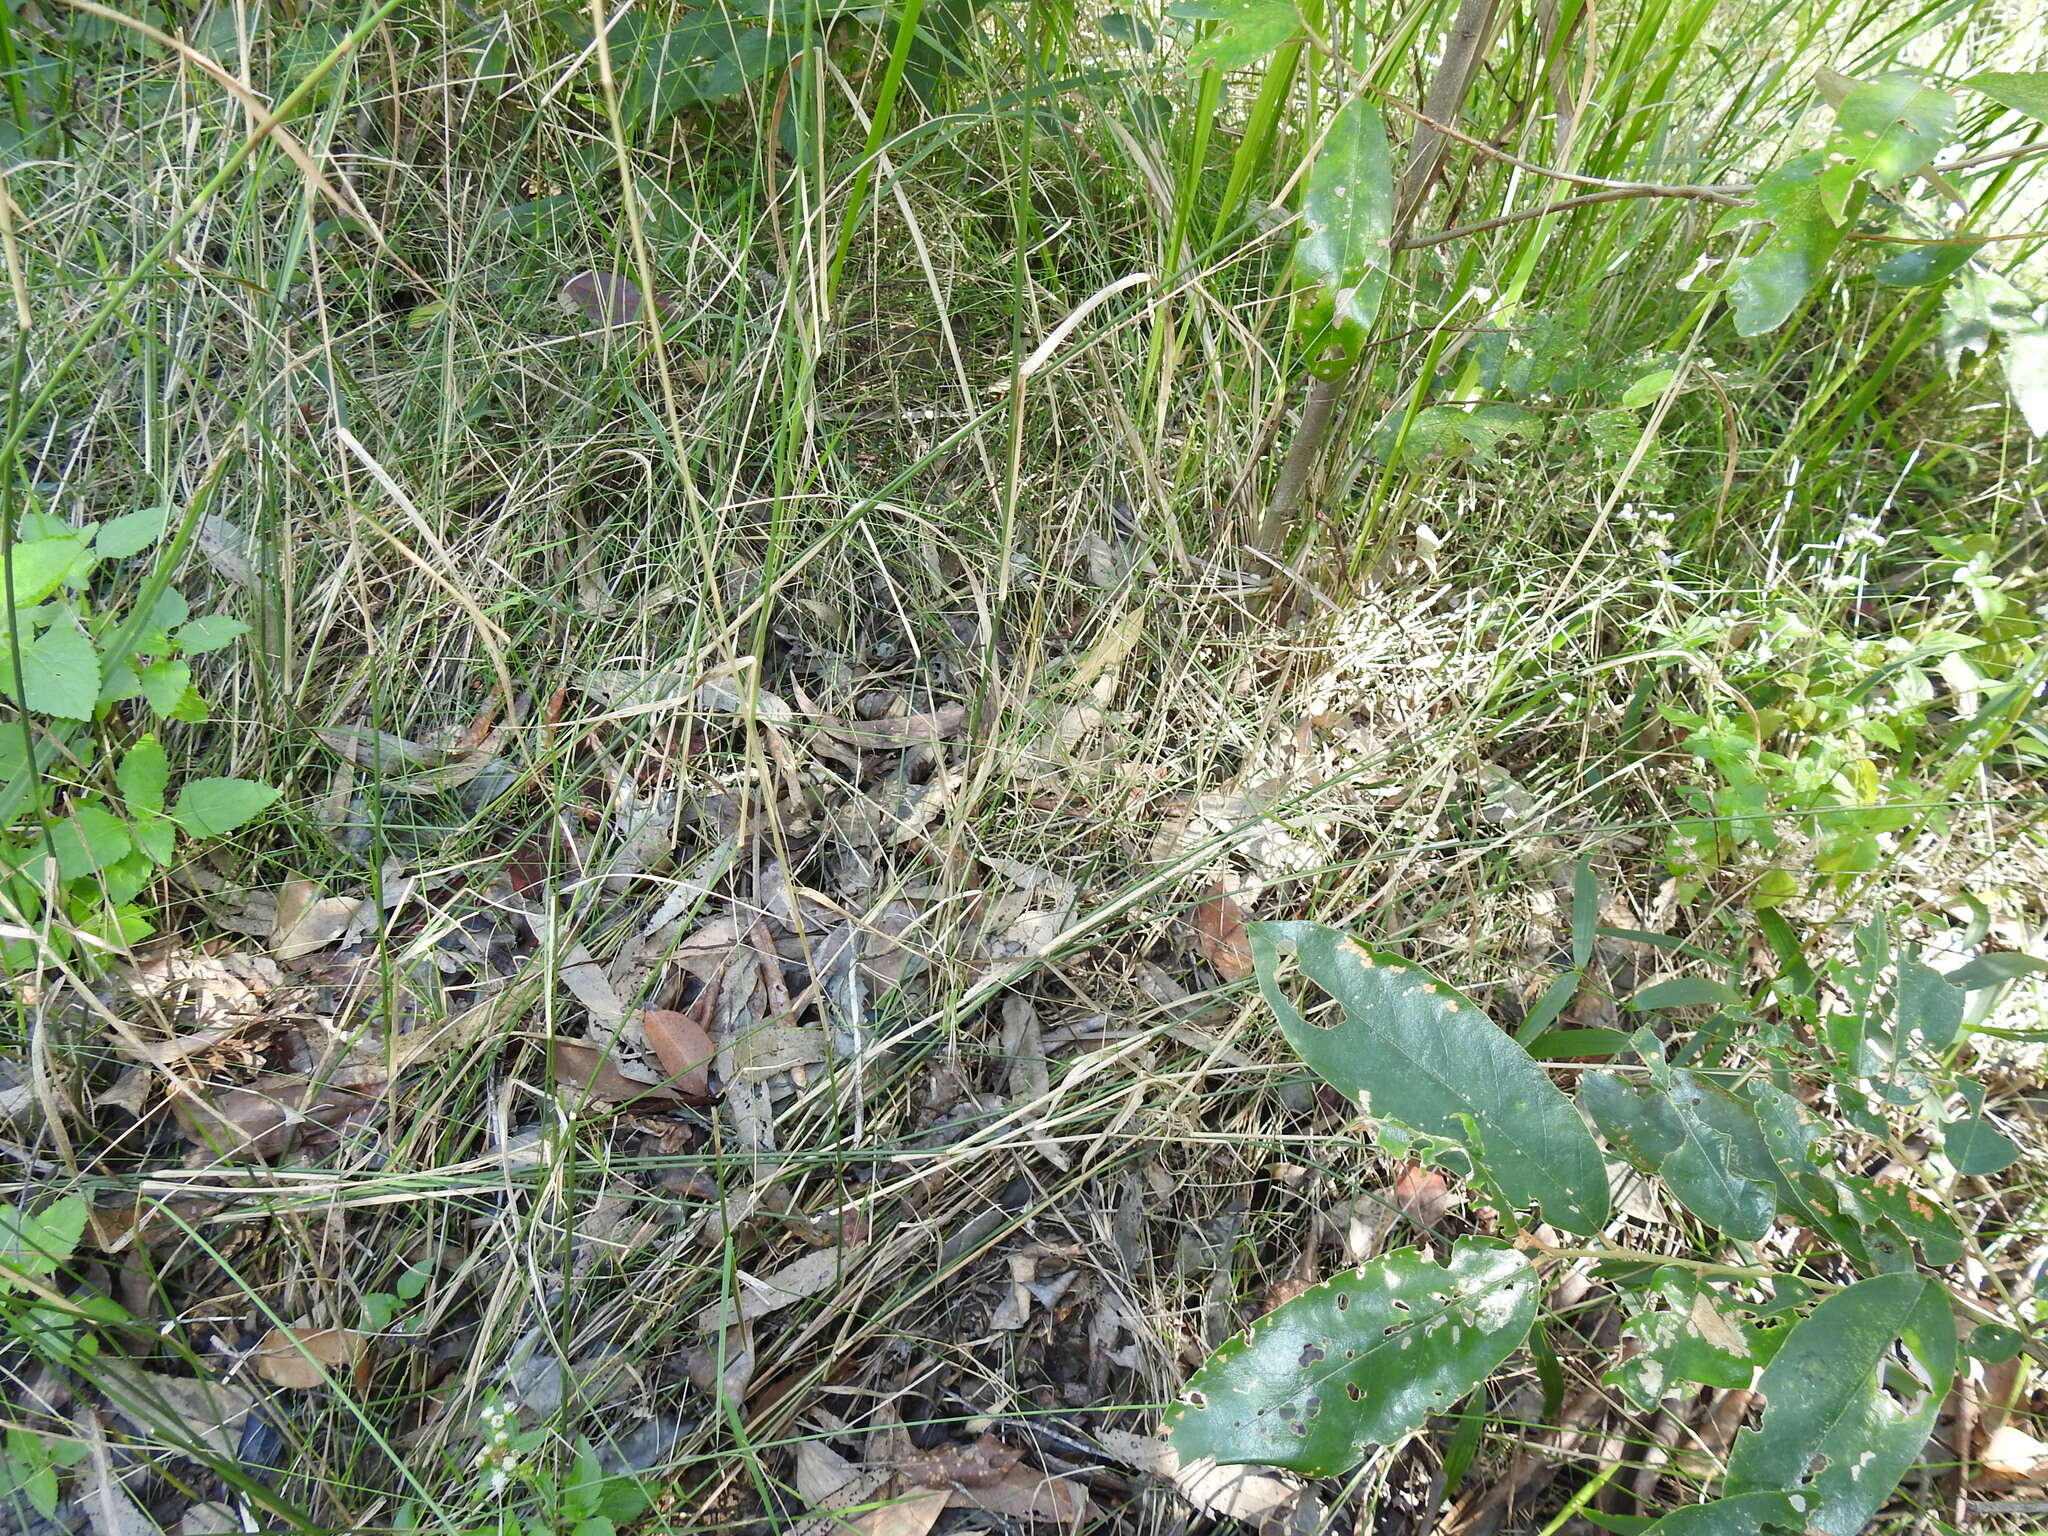 Image of River grass